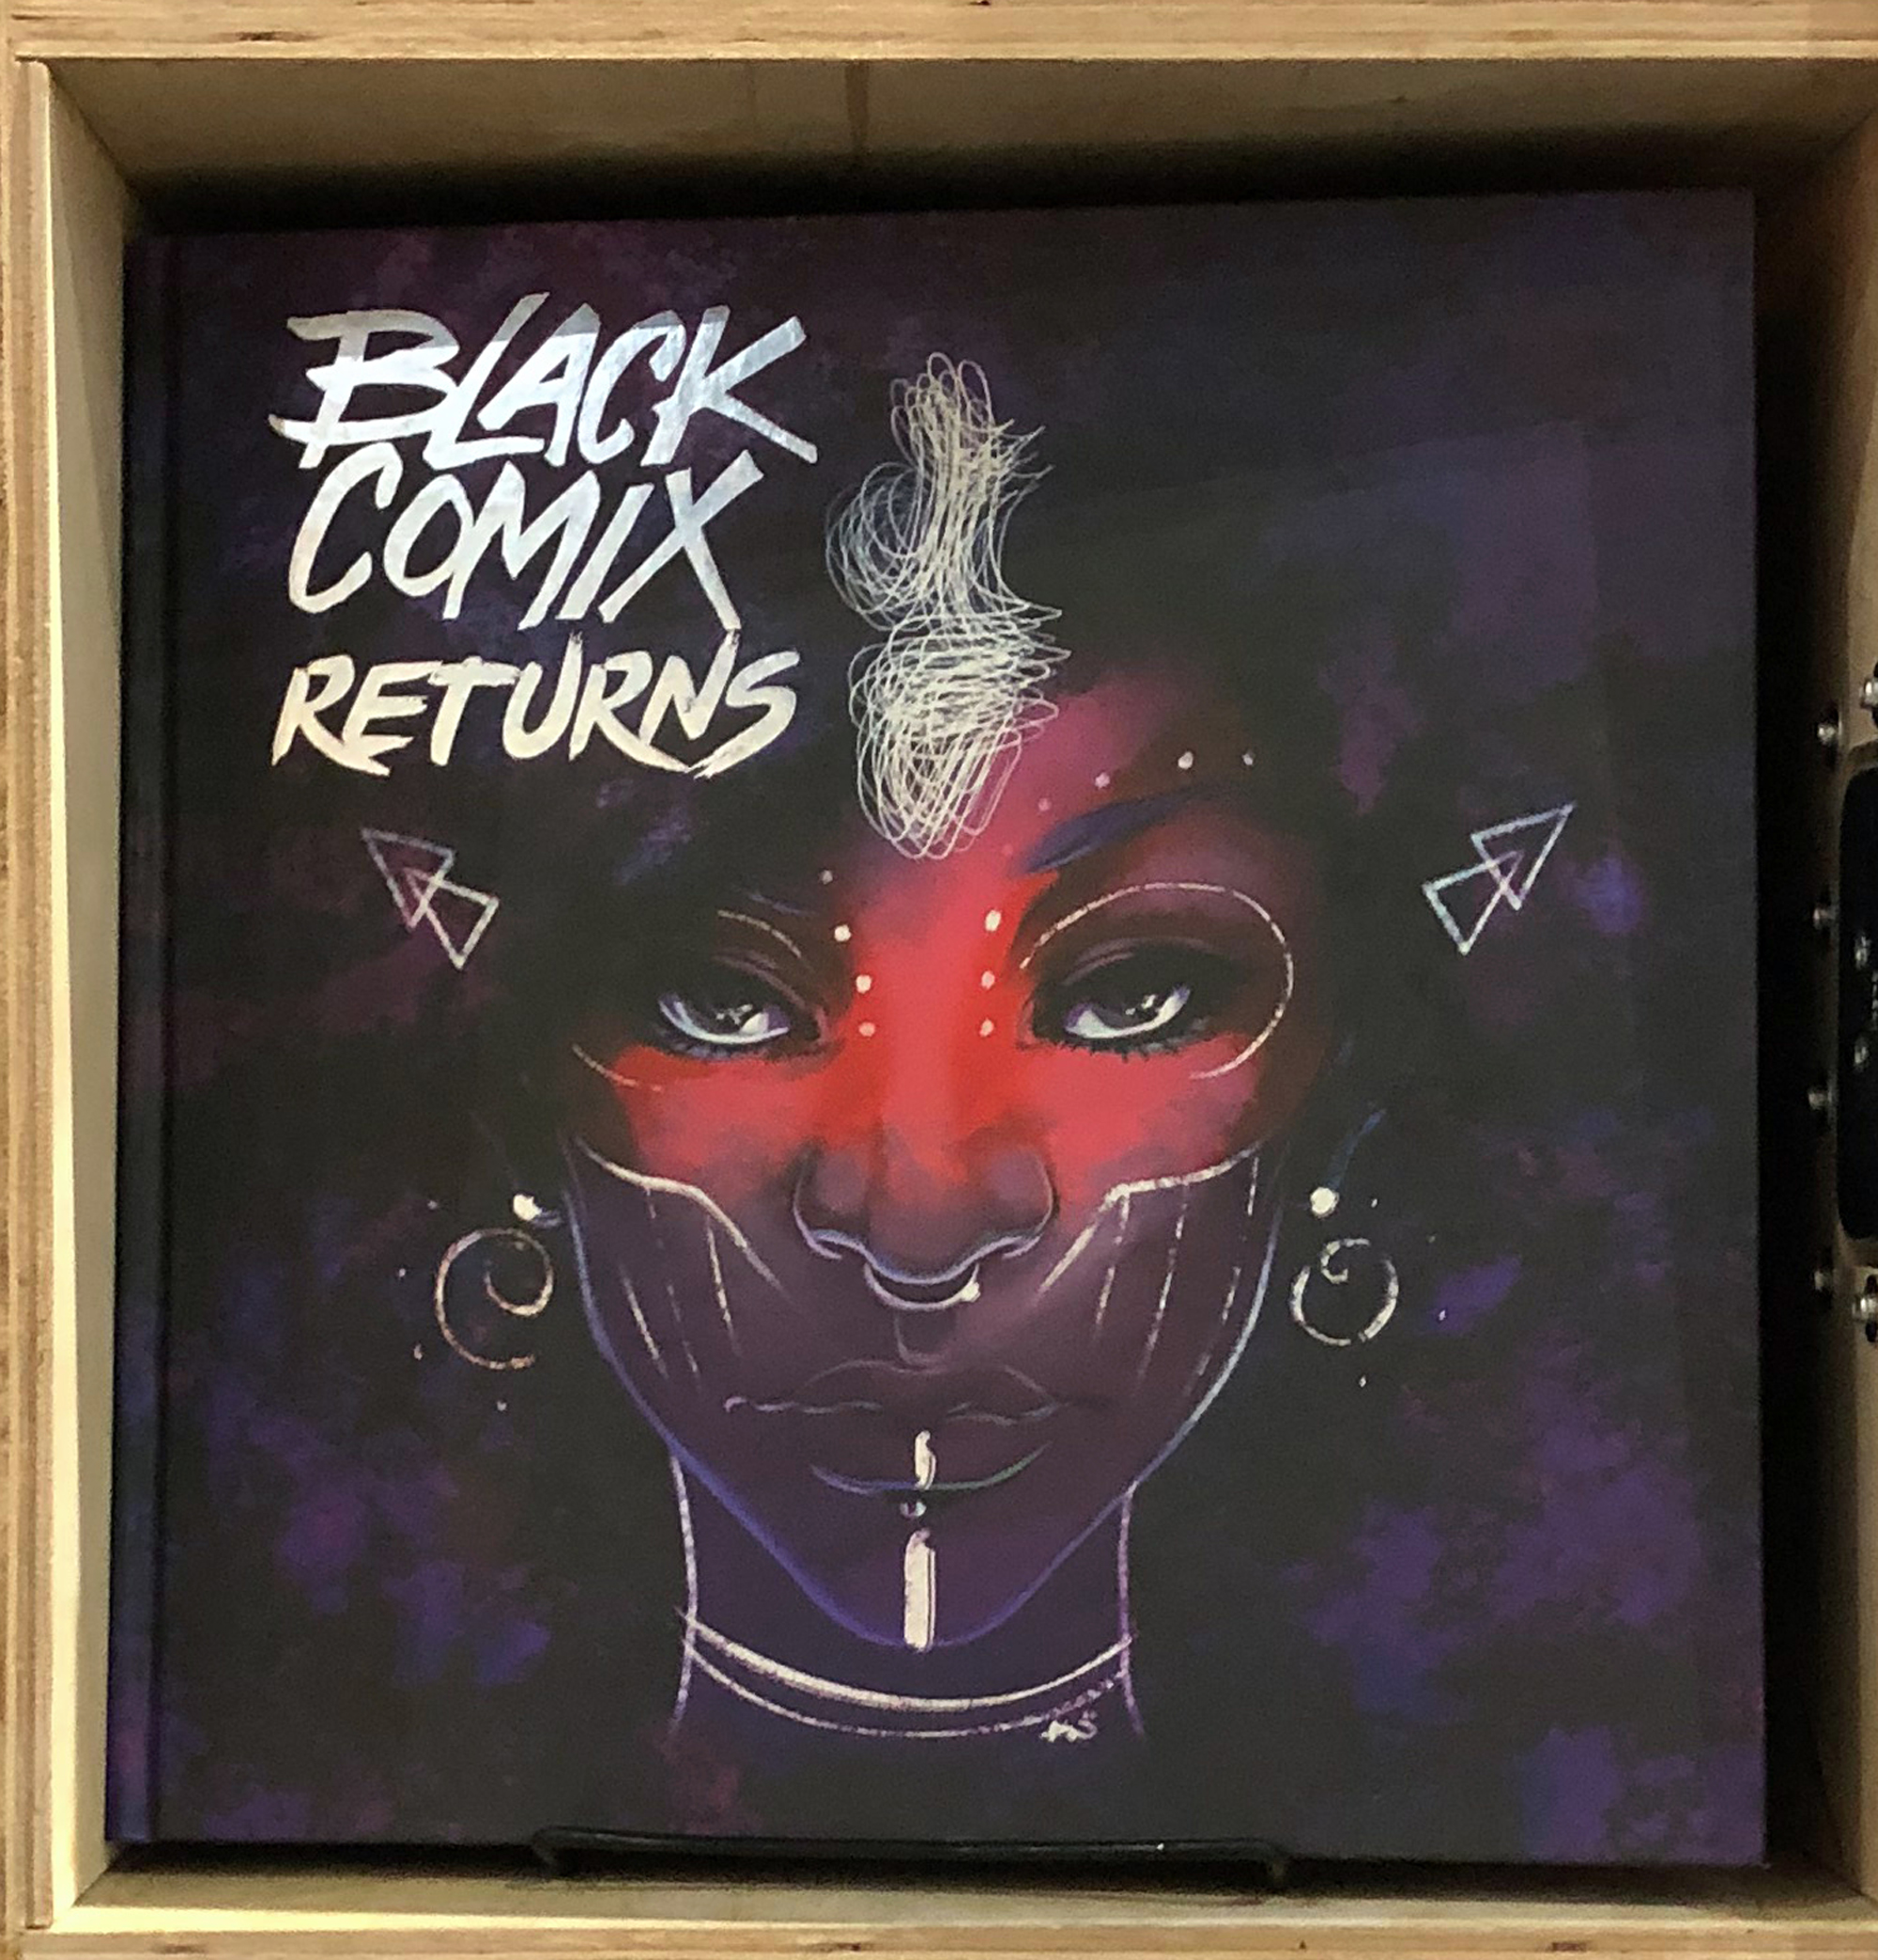 Image: Close up of “Black Comix Returns” on a wood bookshelf. The cover is various shades of purple and features a drawing of a woman’s face, with pink across the bridge of her nose and her cheeks. The artwork on the cover is by Ashley A. Woods. Photo by Jessica Hammie.